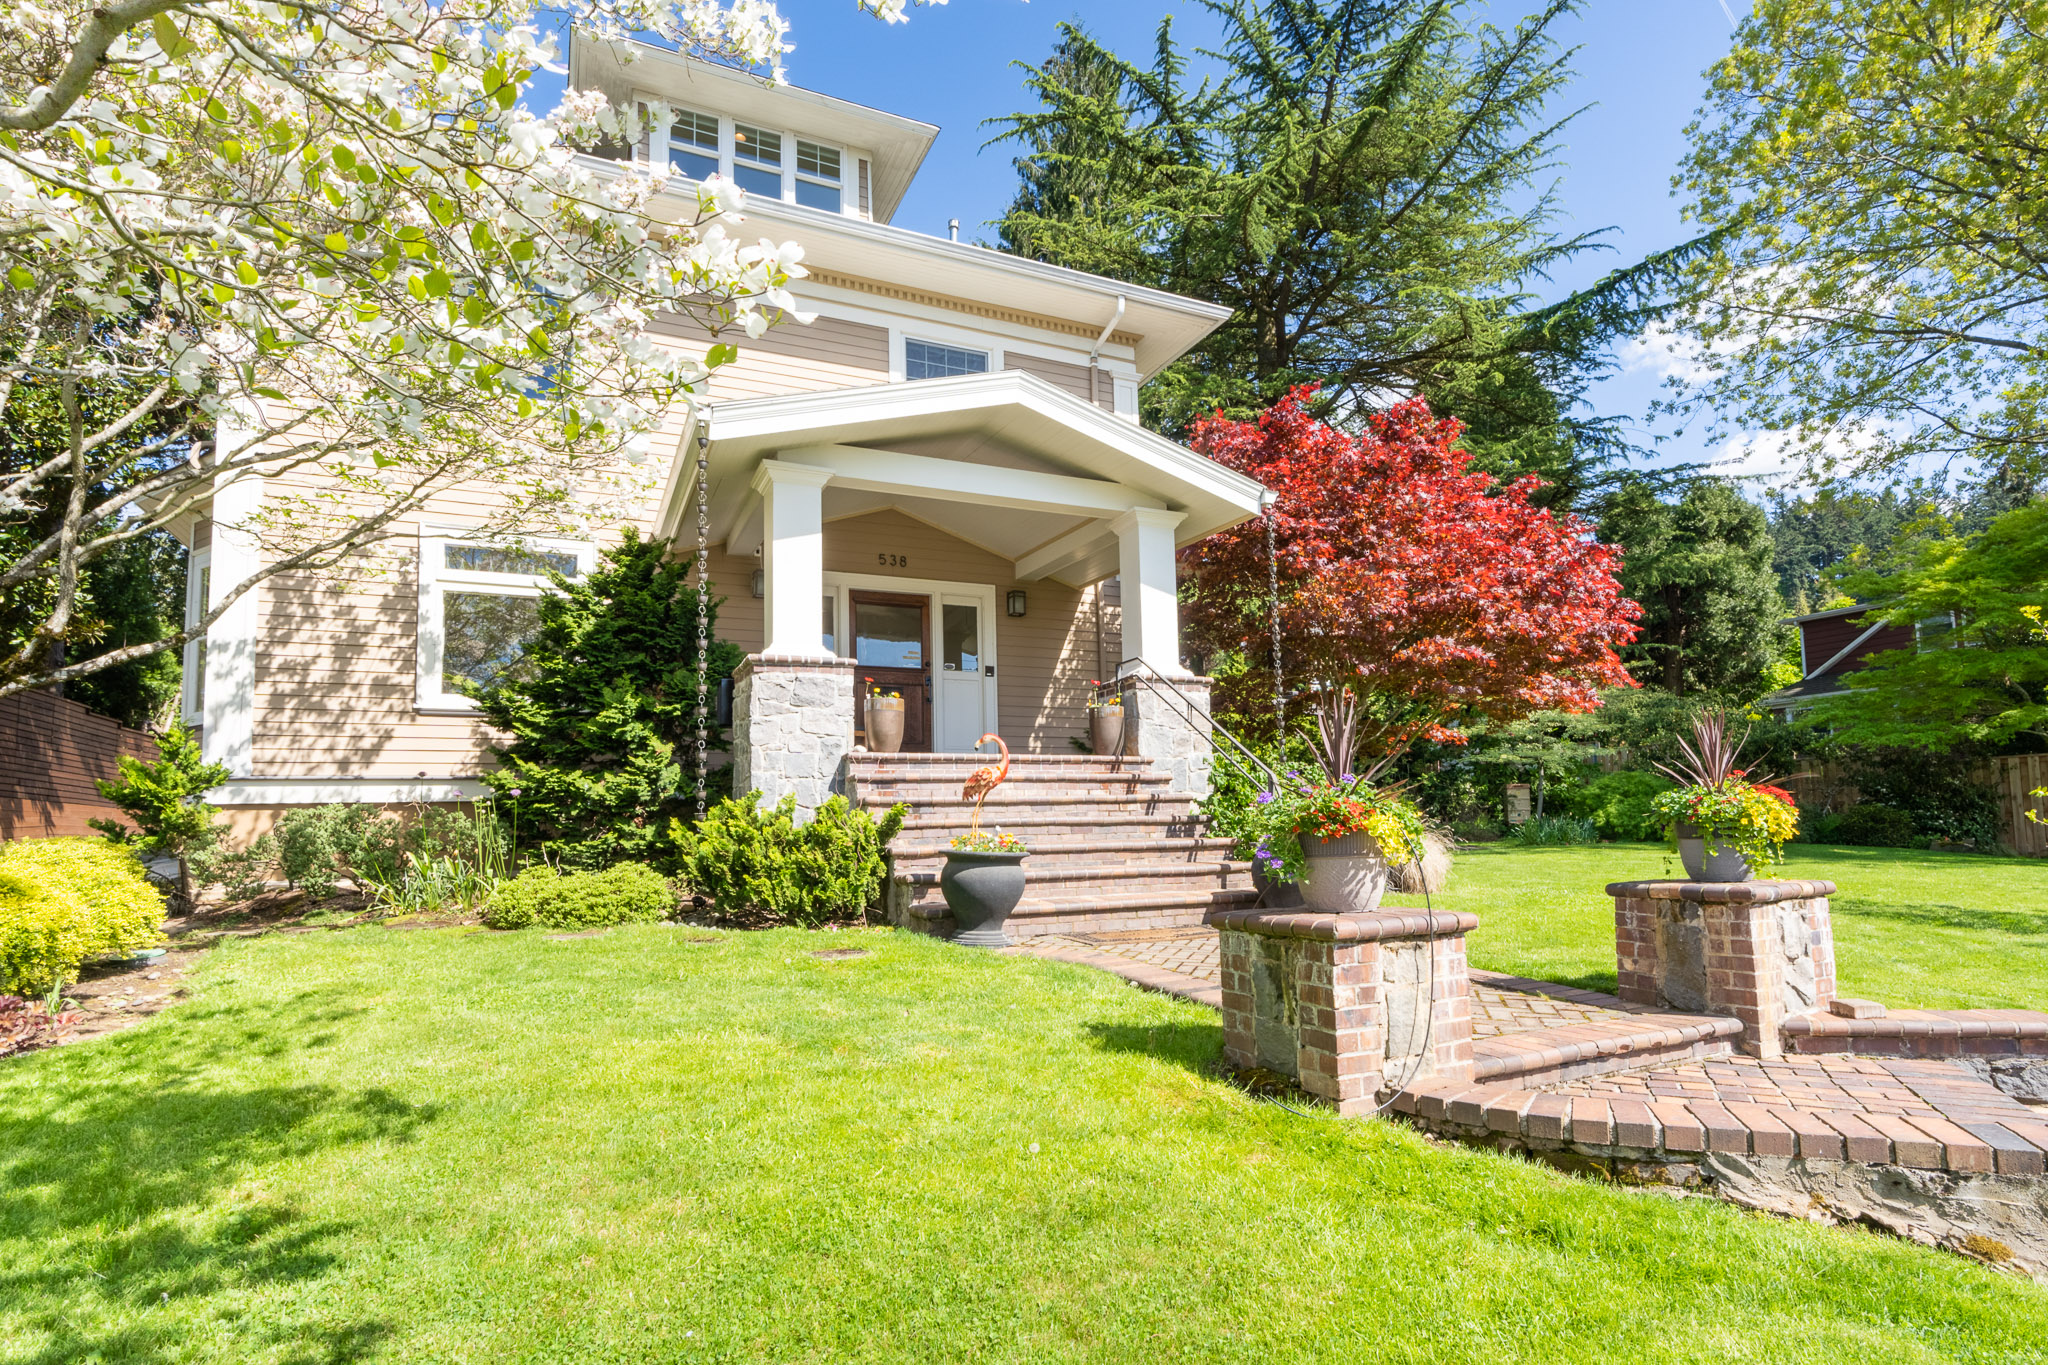 SOLD for $1,459,000 in 8 DOM! 538 SE 62nd Ave